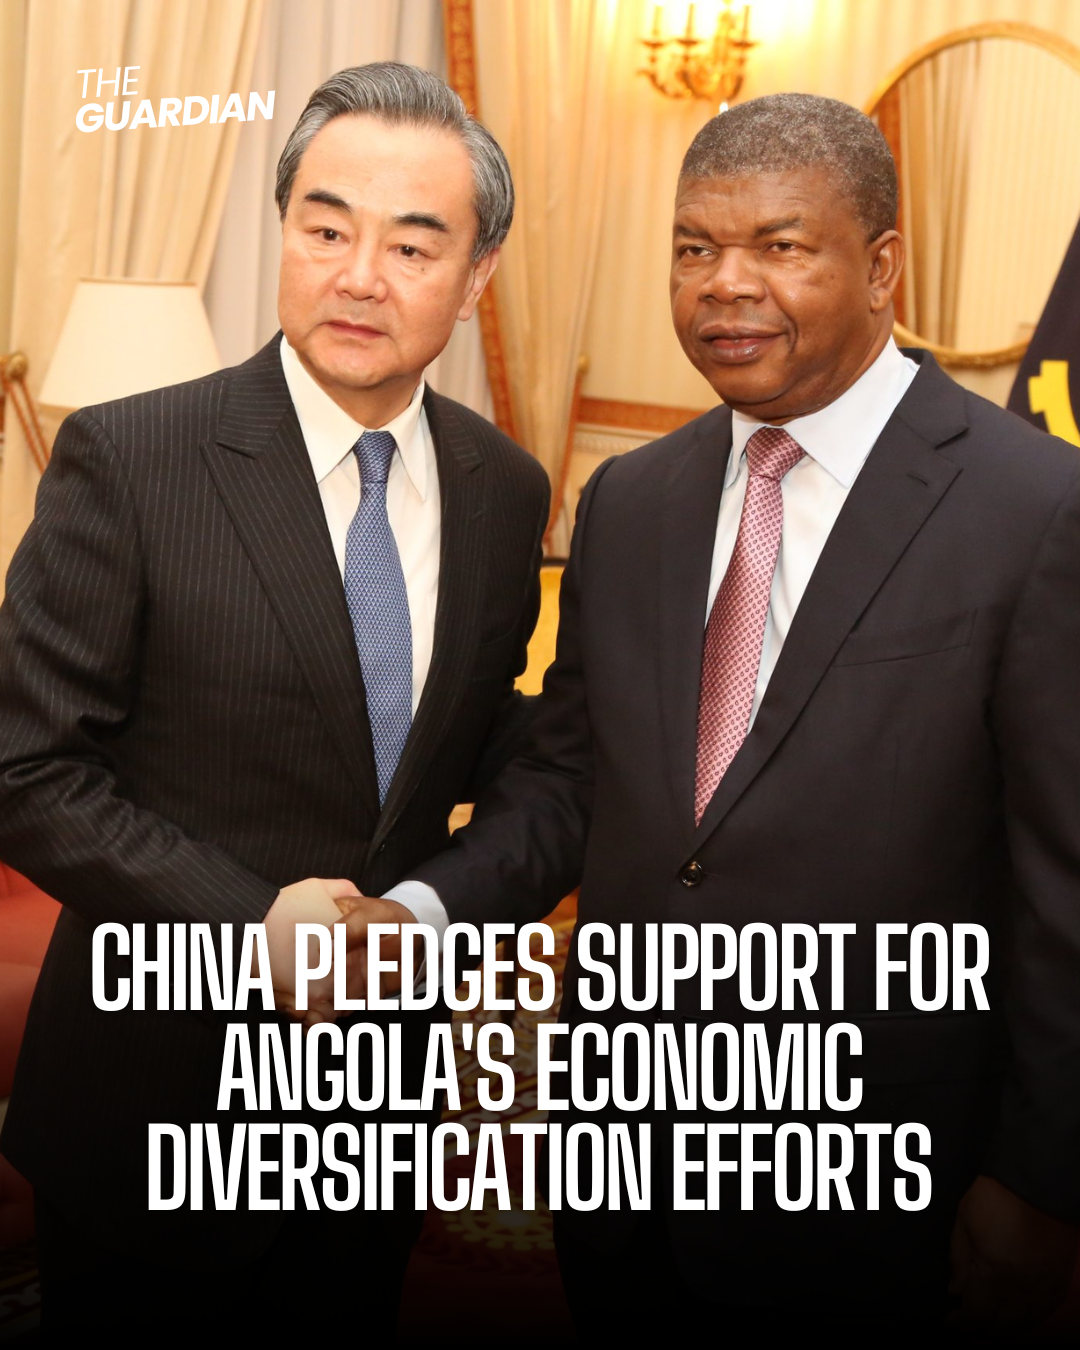 President Xi Jinping has expressed his country's willingness to assist Chinese enterprises investing in Angola's agriculture industry.